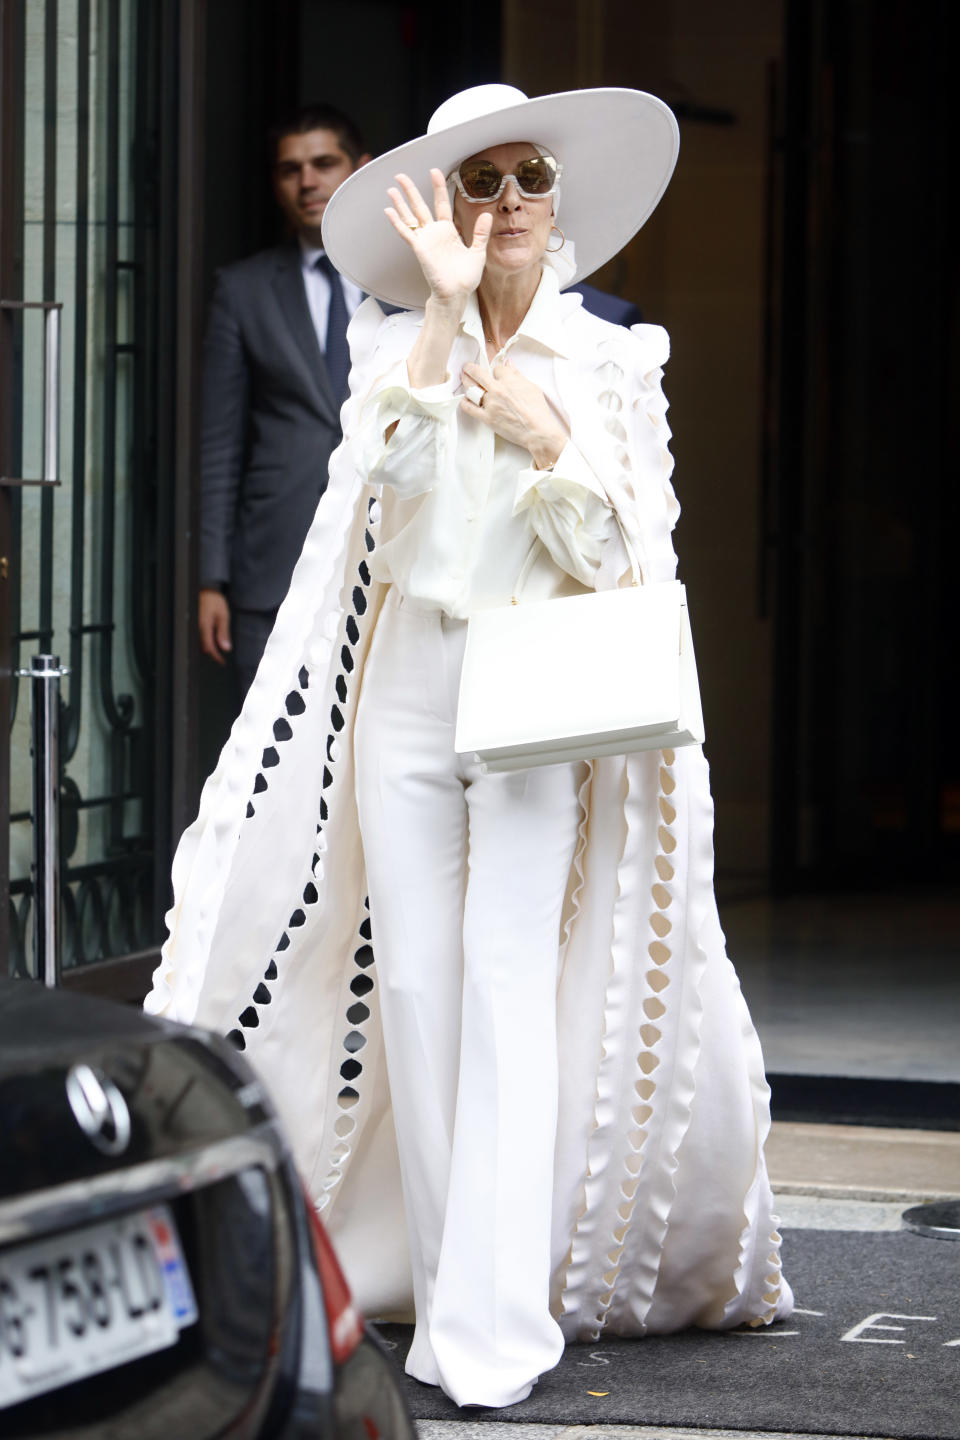 Celine Dion left her Paris hotel in a stunning white Ralph and Russo look on July 12, 2017. (Photo by Mehdi Taamallah/NurPhoto via Getty Images)